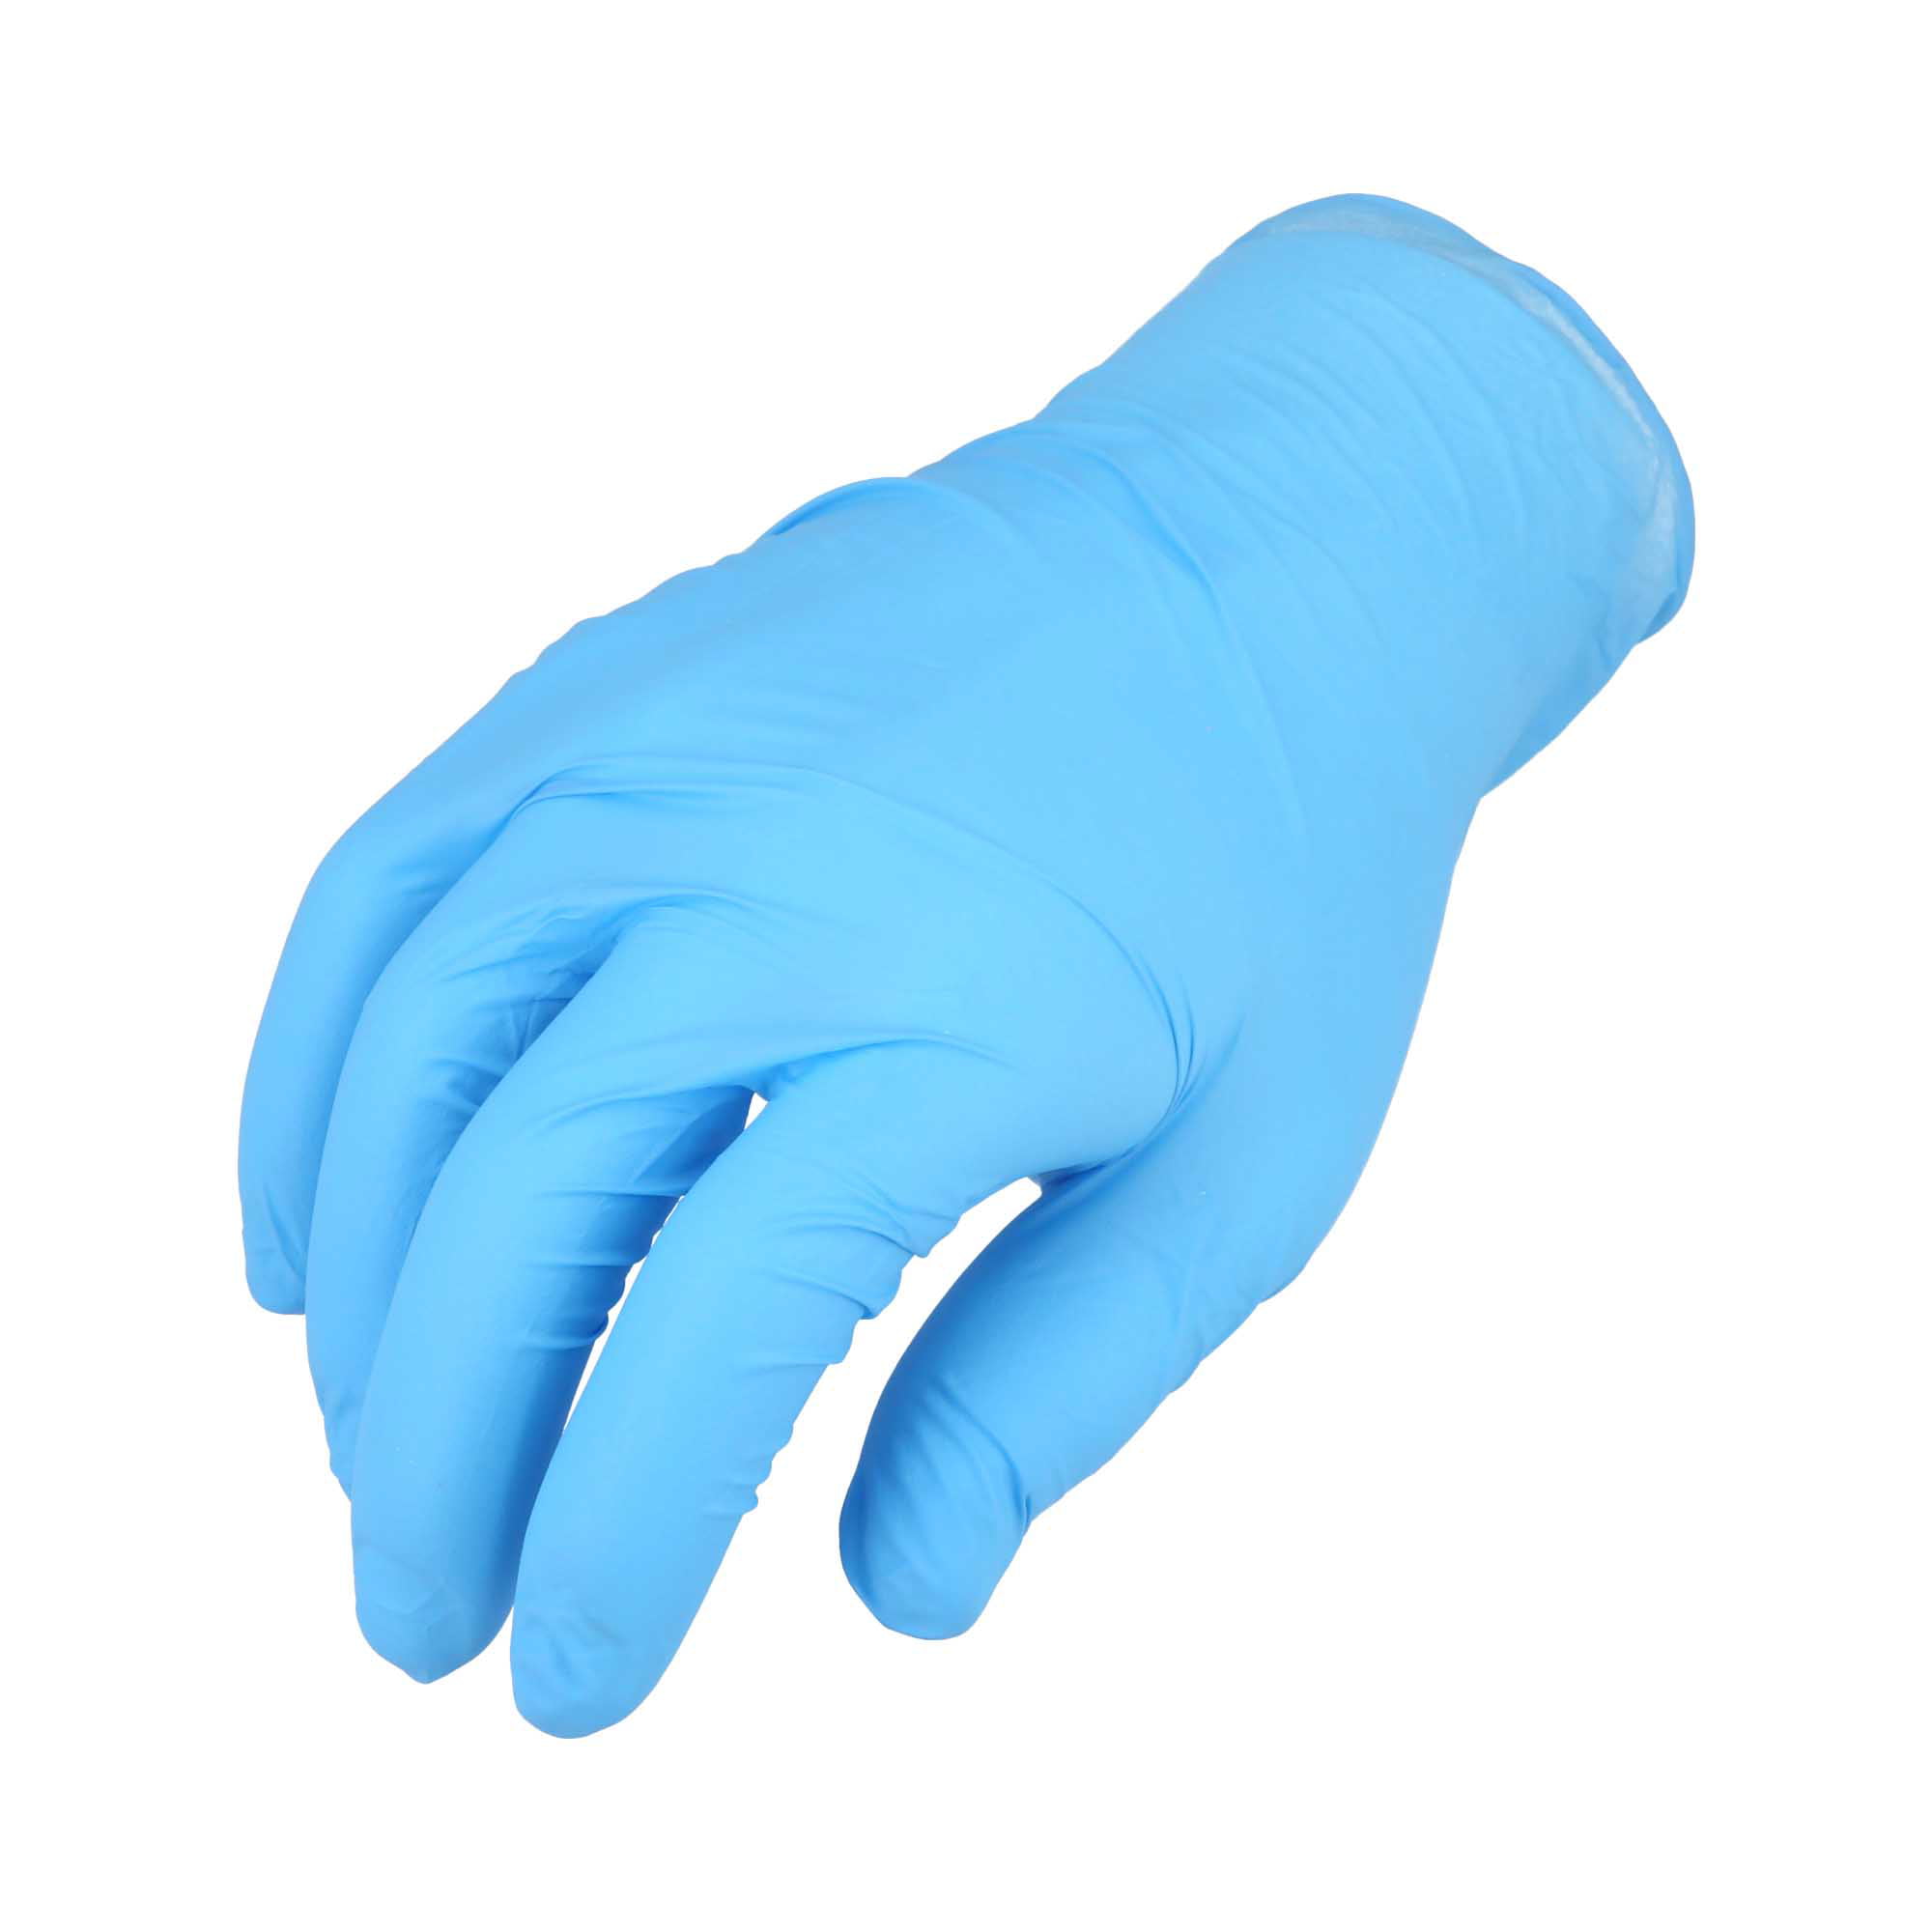 6 MIL THICK HEAVY DUTY 1000 LIGHTLY POWDERED Textured Nitrile Glove Blue Durable